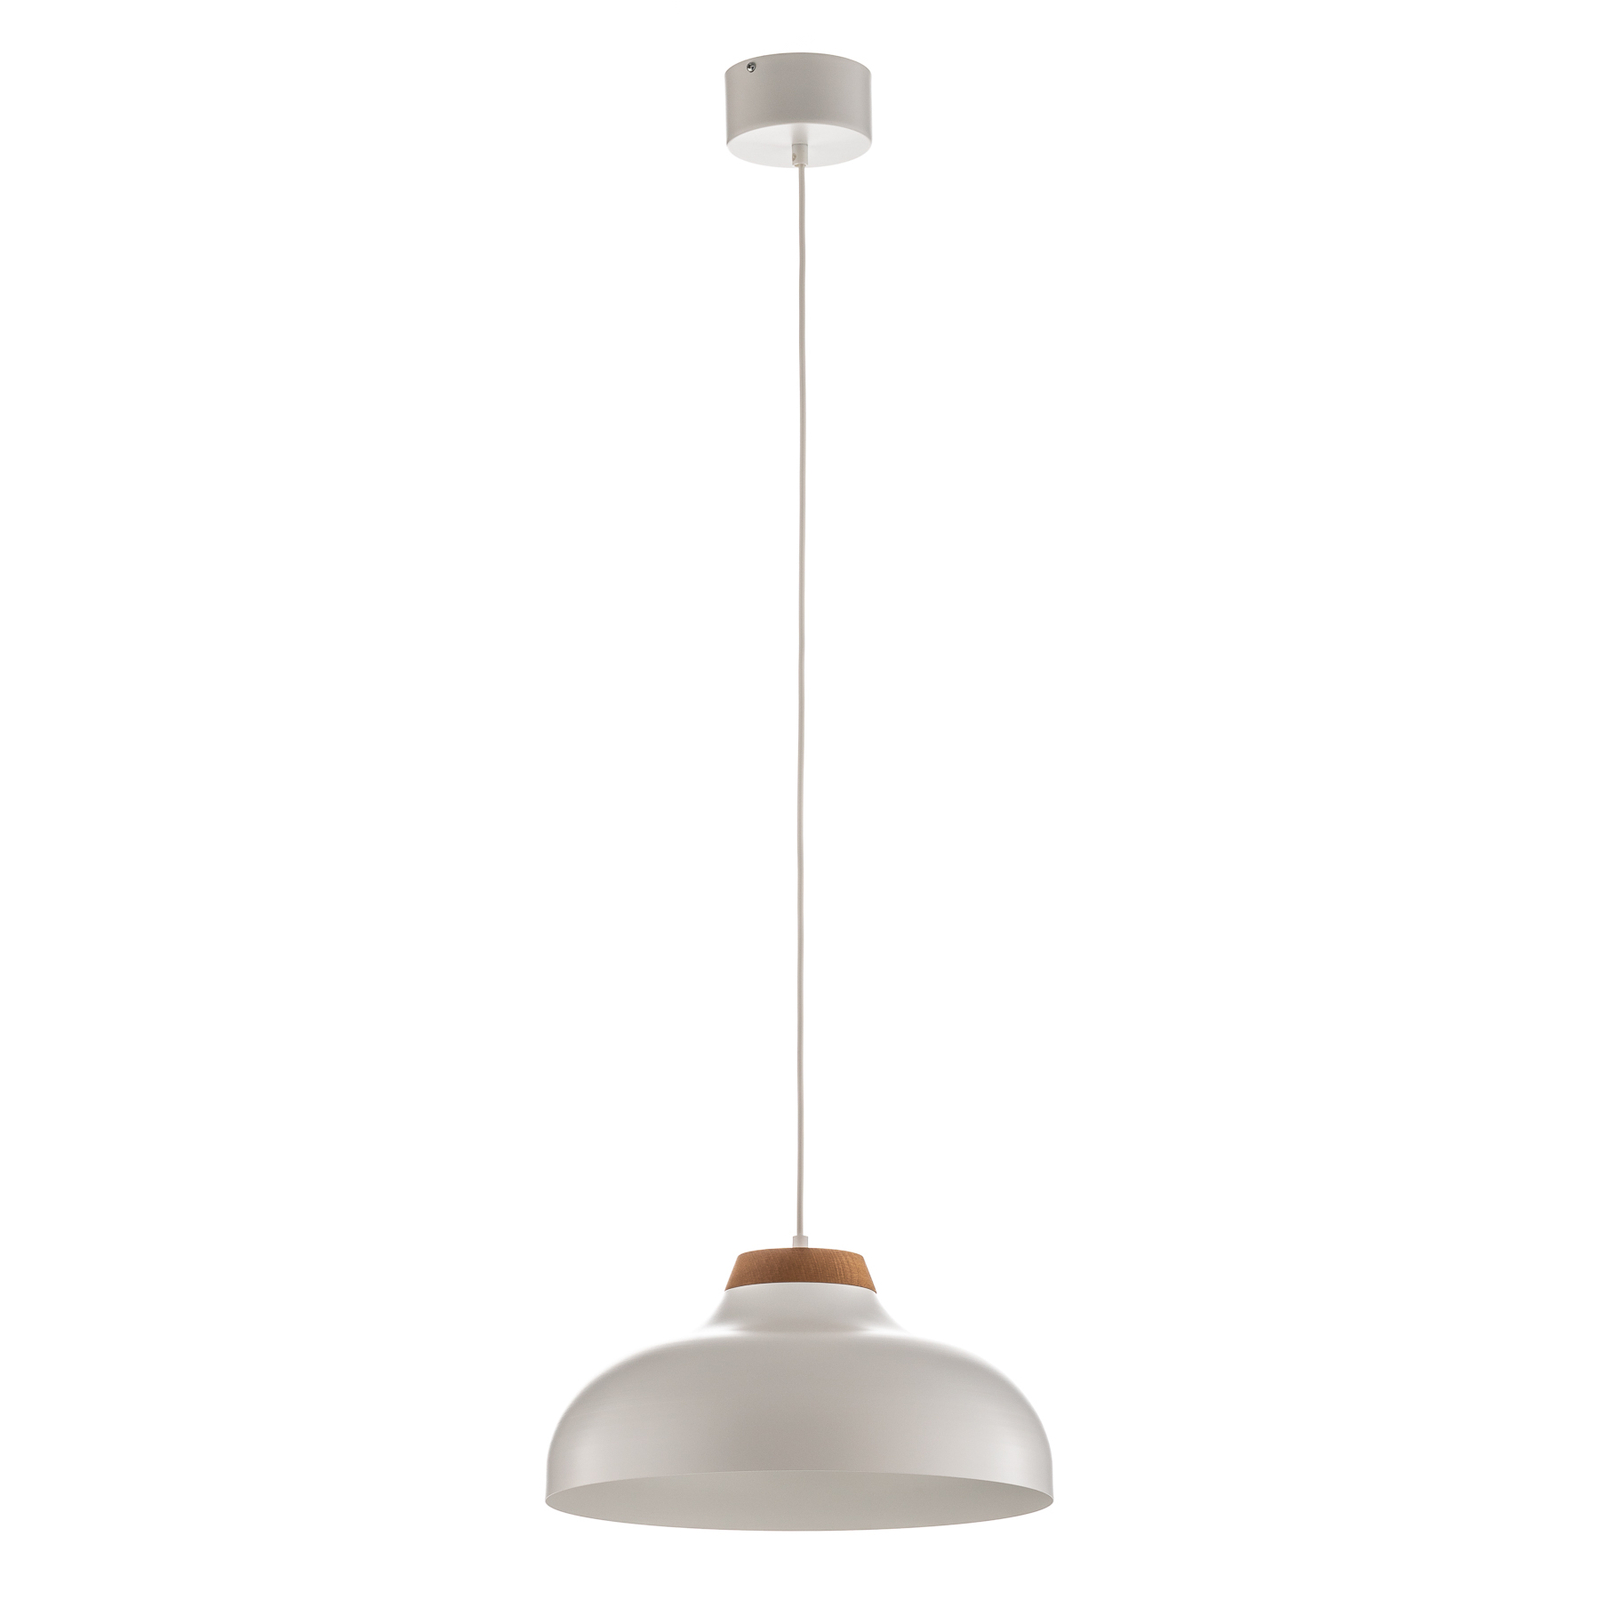 Gus pendant light with metal shade, white